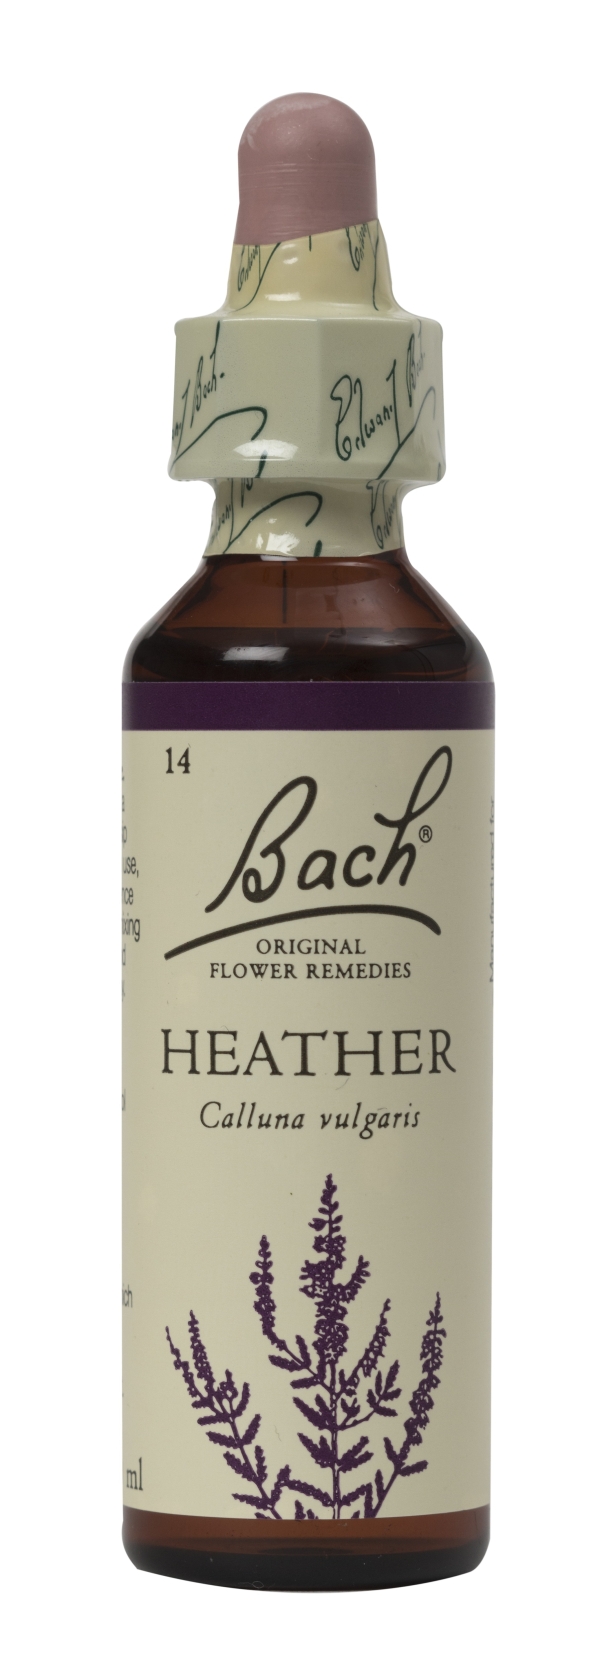 Nelson Bach Flower Remedies: Bach Heather  Flower Remedy (20ml) available online here